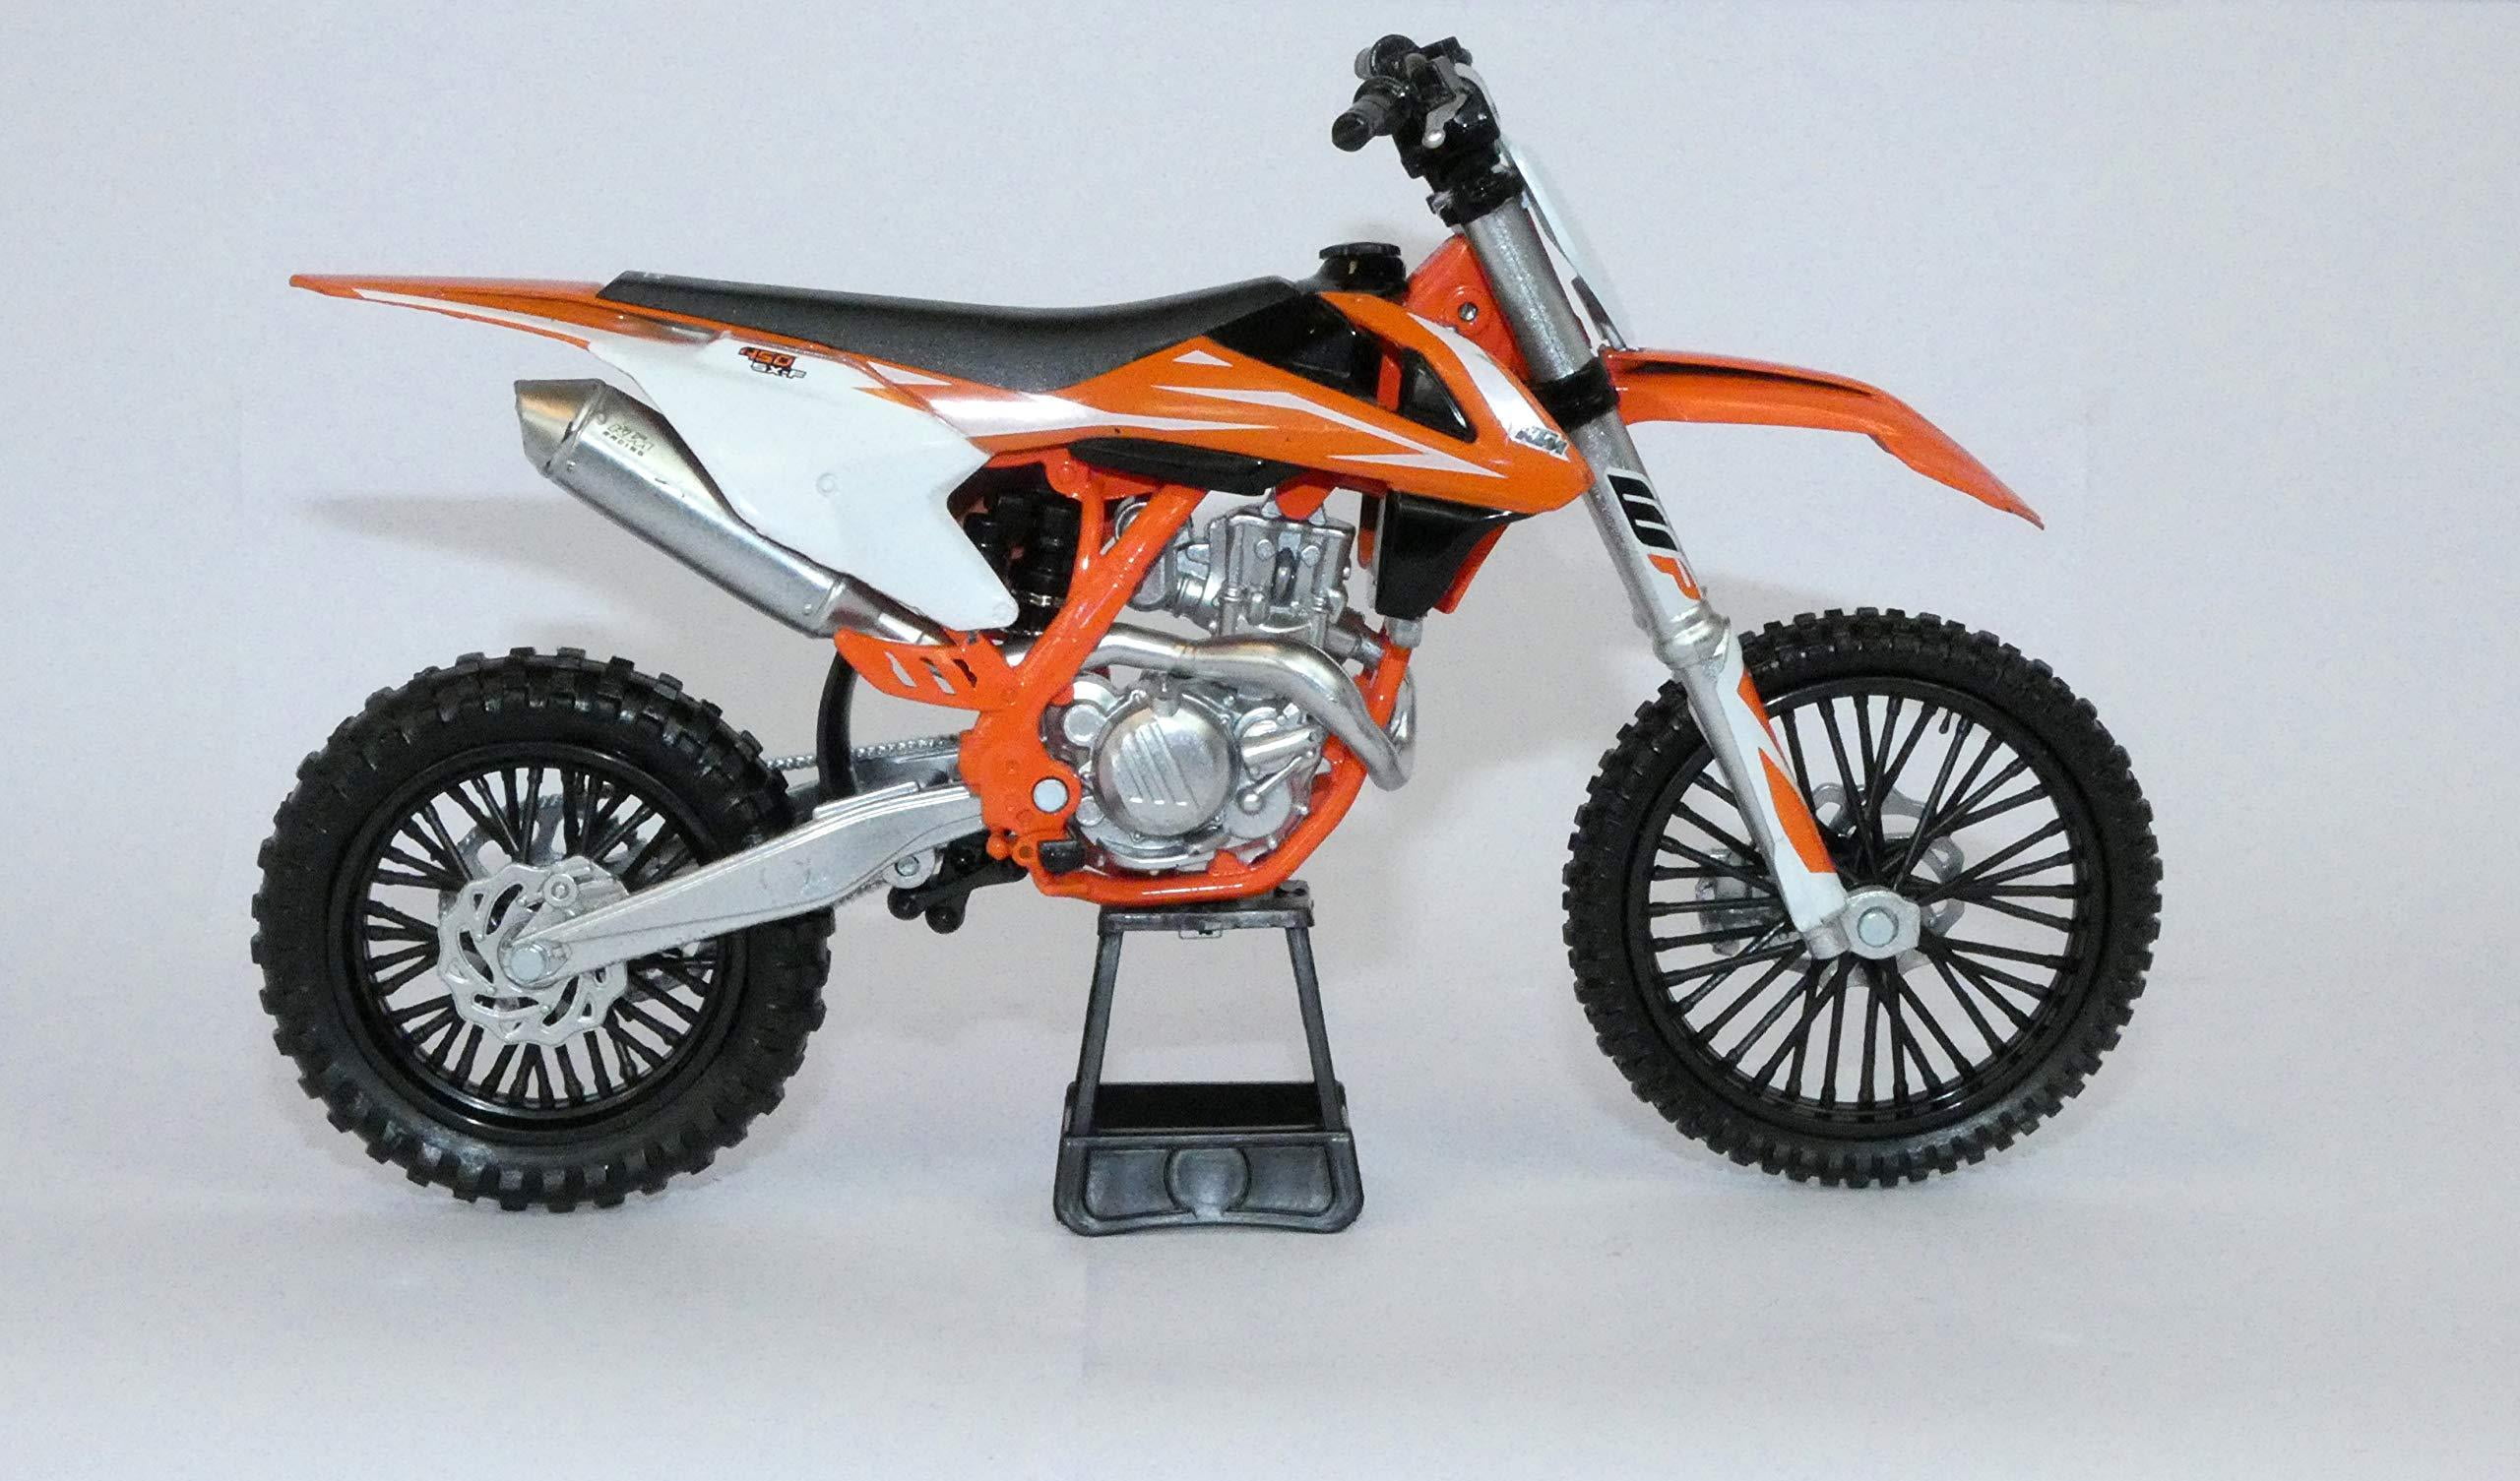 KTM 450 SX-F DIRT BIKE ORANGE AND WHITE 1/10 MOTORCYCLE MODEL BY NEW RAY 57943 